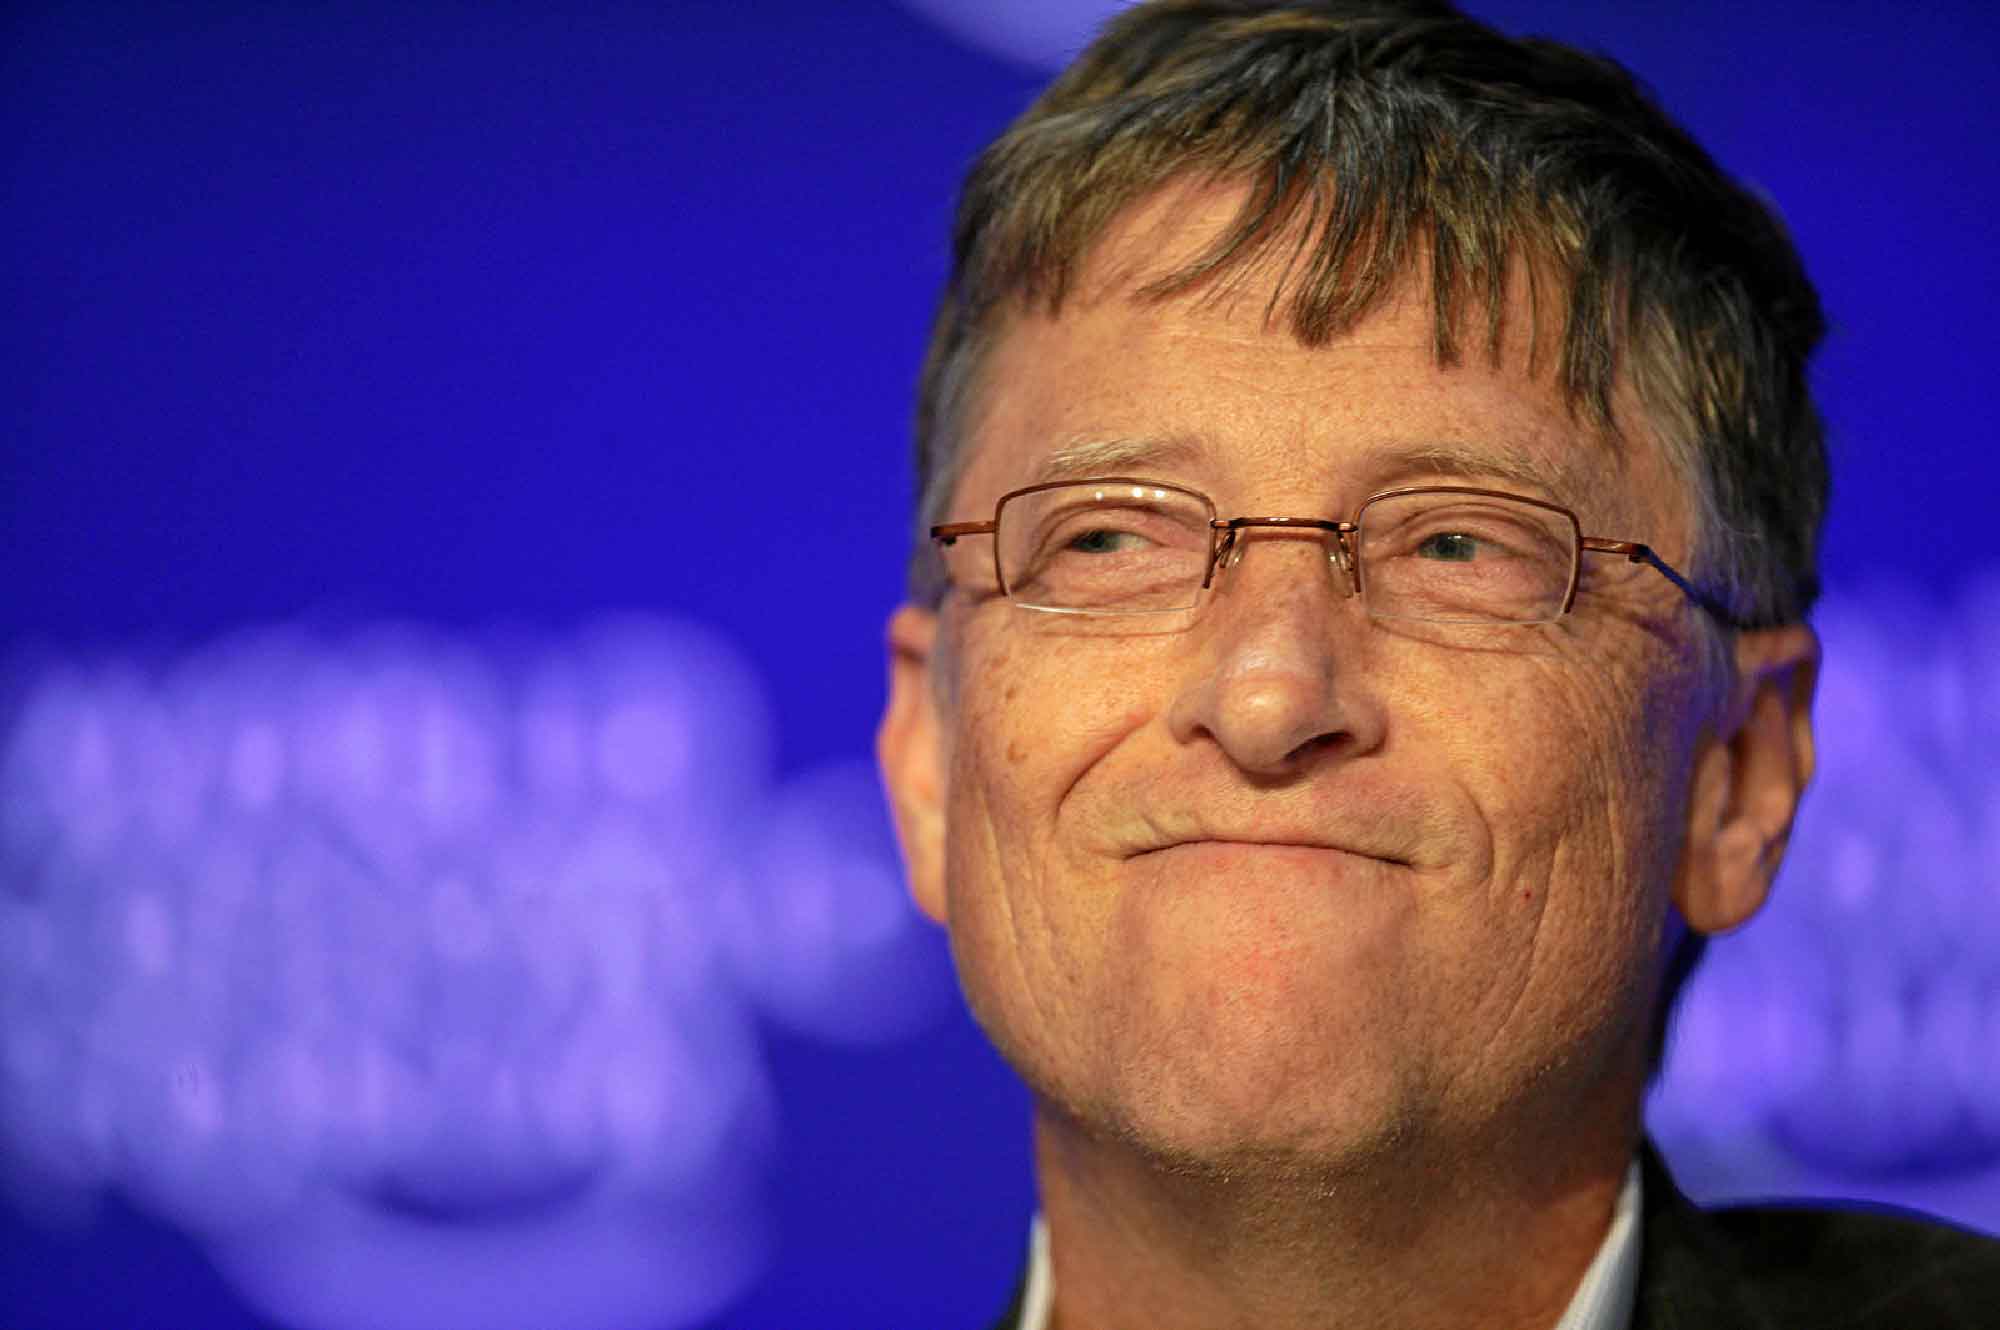 Bill Gates Meets With Bloggers In A Effort To Promote Microsoft's Zune Media Player